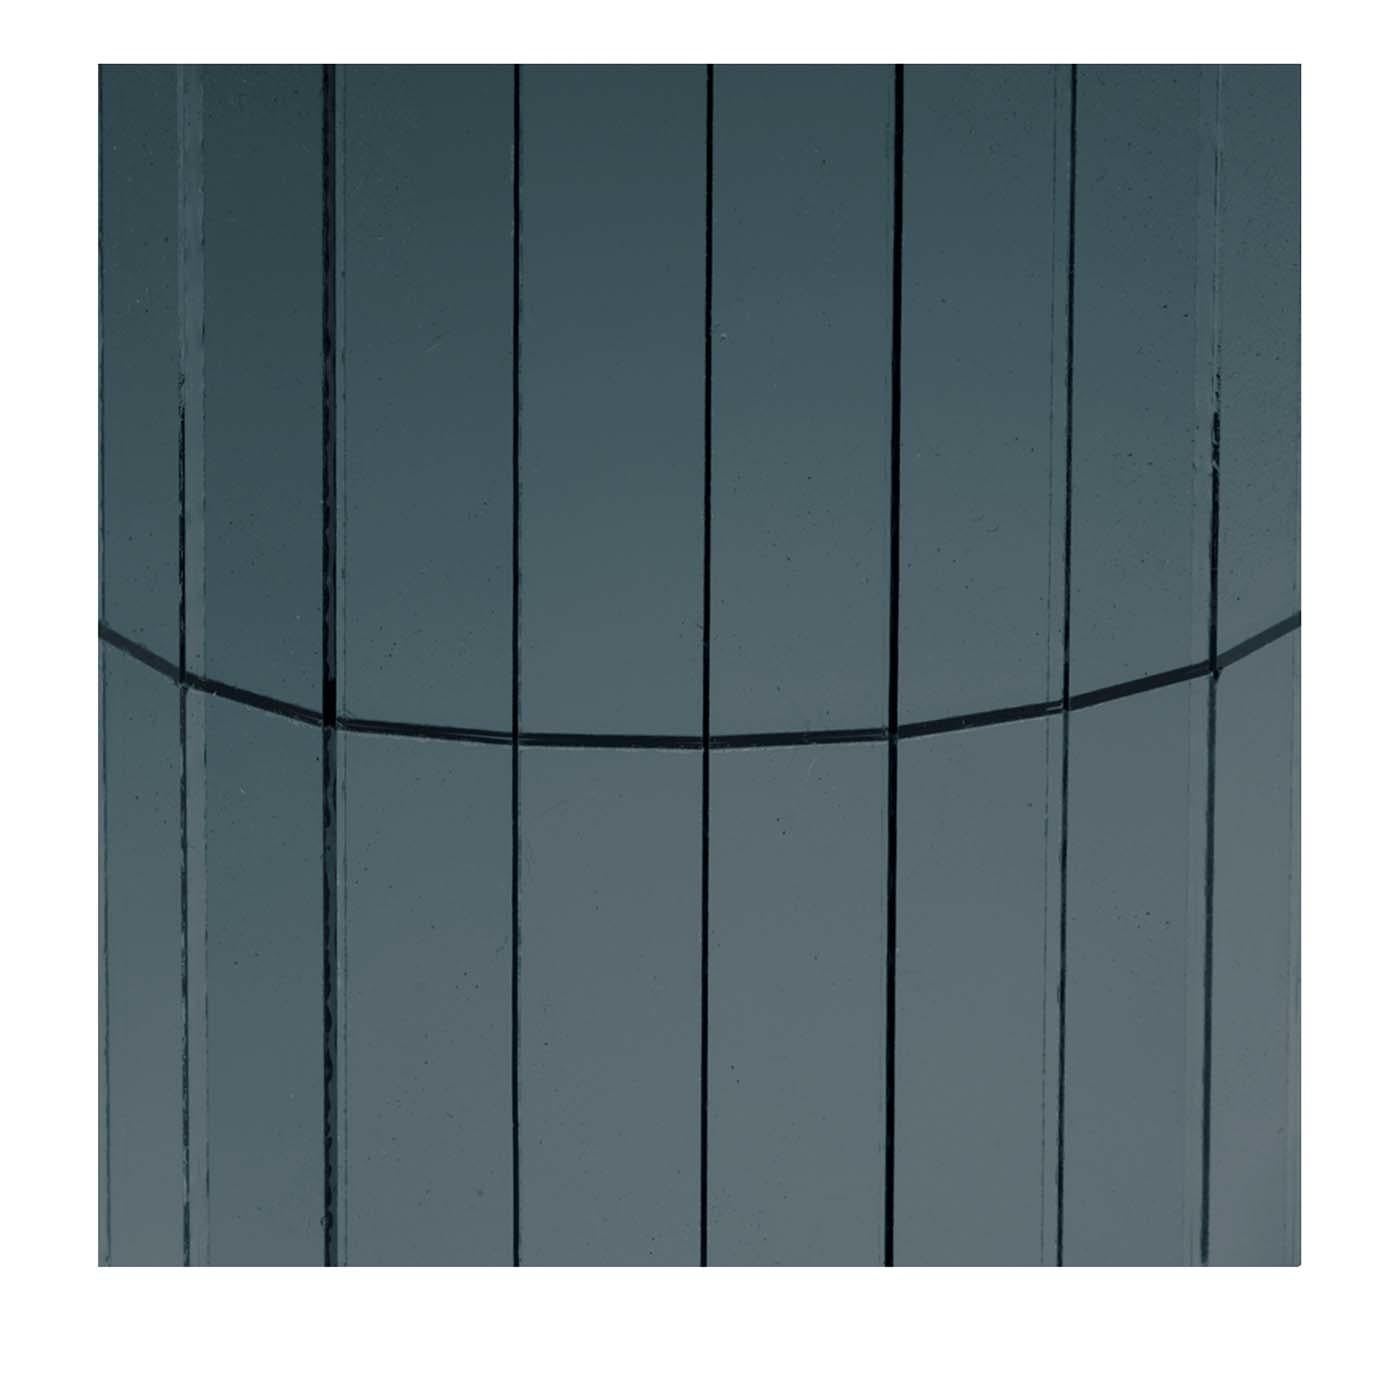 These smokey and dark glass mosaic panele by Antique Mirror makes for an austere and moody effect. This piece was crafted of 12.5 x 50 mm glass tiles attached on a canvas base to create a striking contrast against a light wall, or to provide a